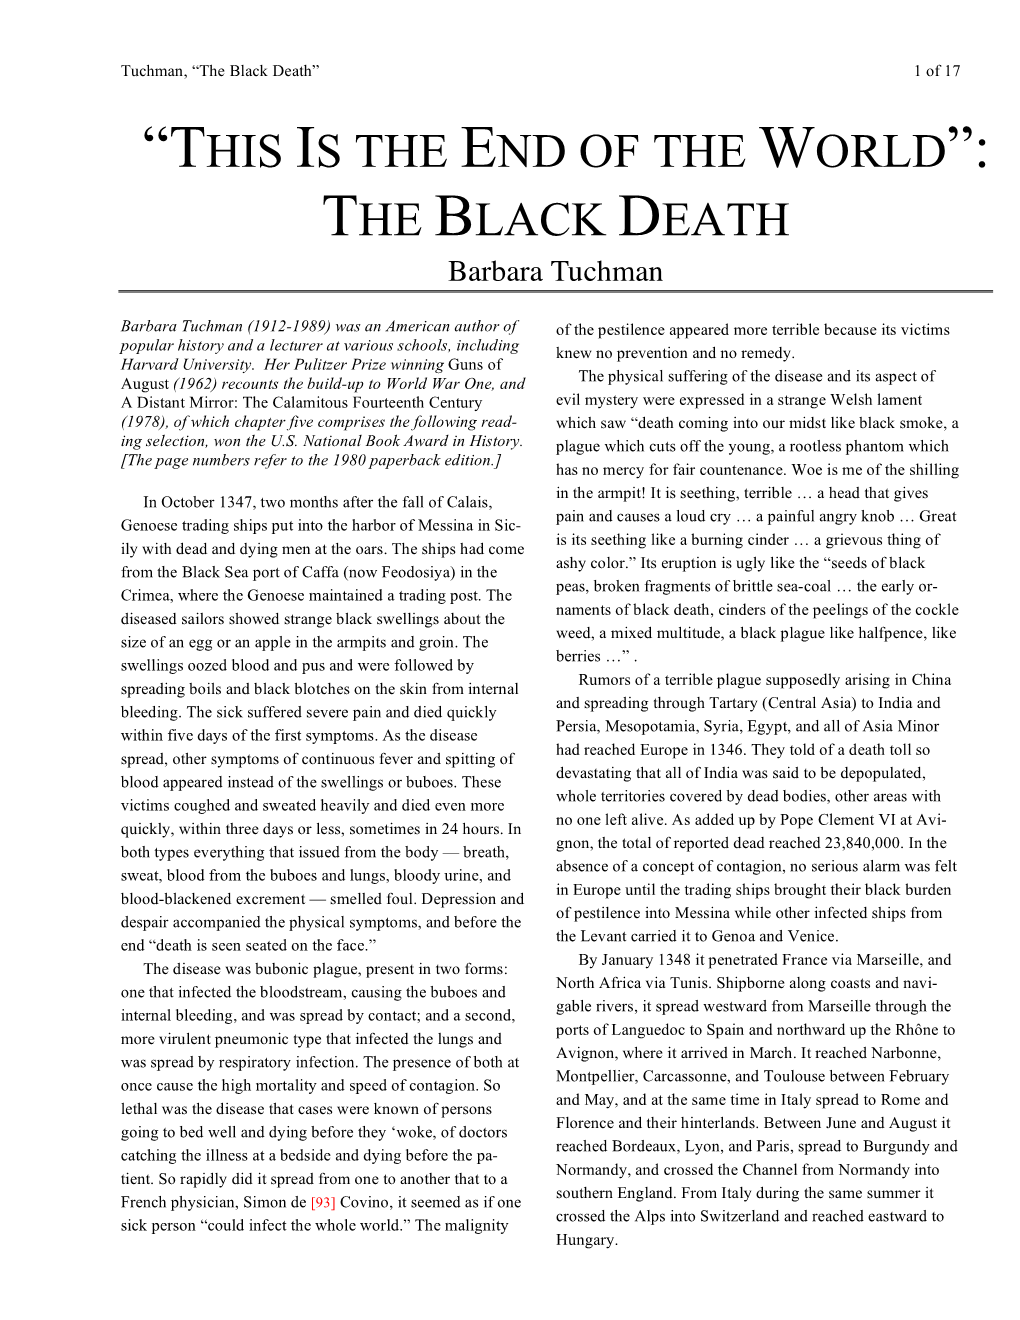 “THIS IS the END of the WORLD”: the BLACK DEATH Barbara Tuchman